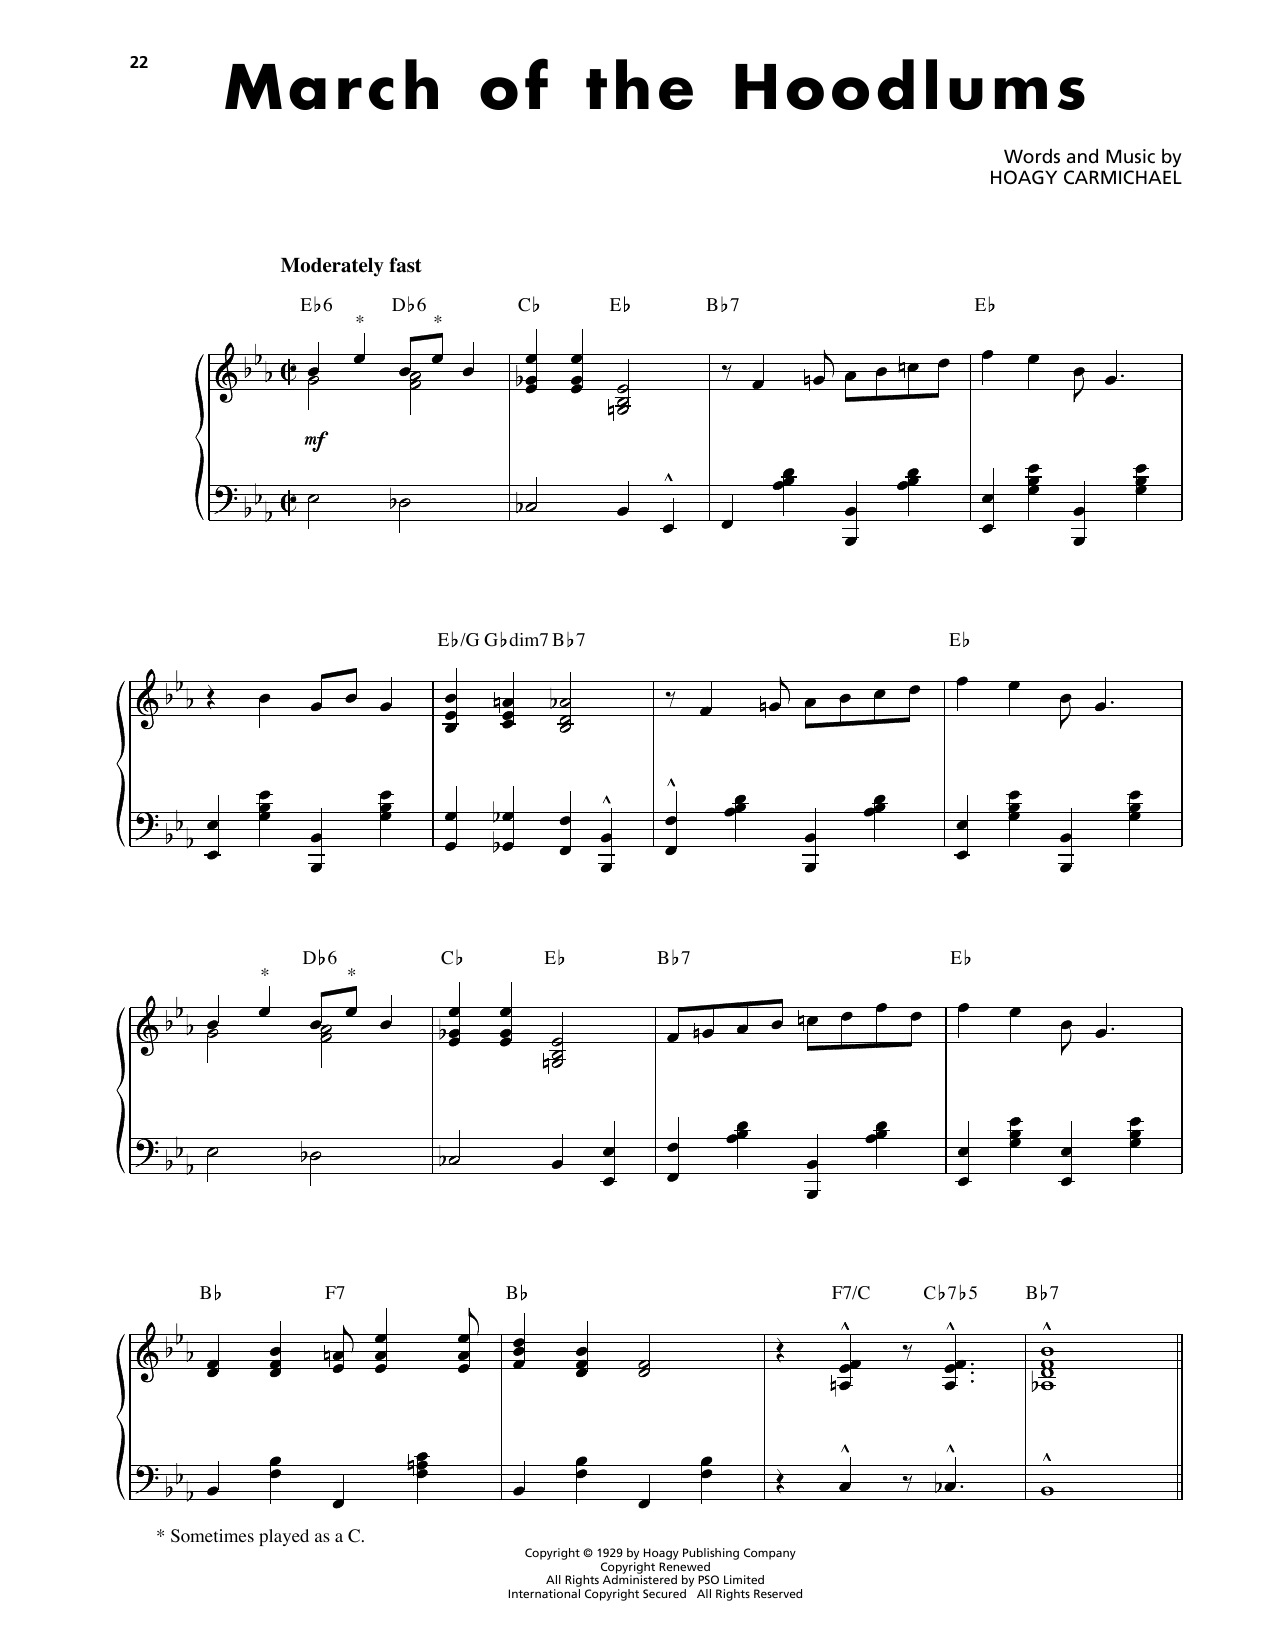 Download Hoagy Carmichael March Of The Hoodlums Sheet Music